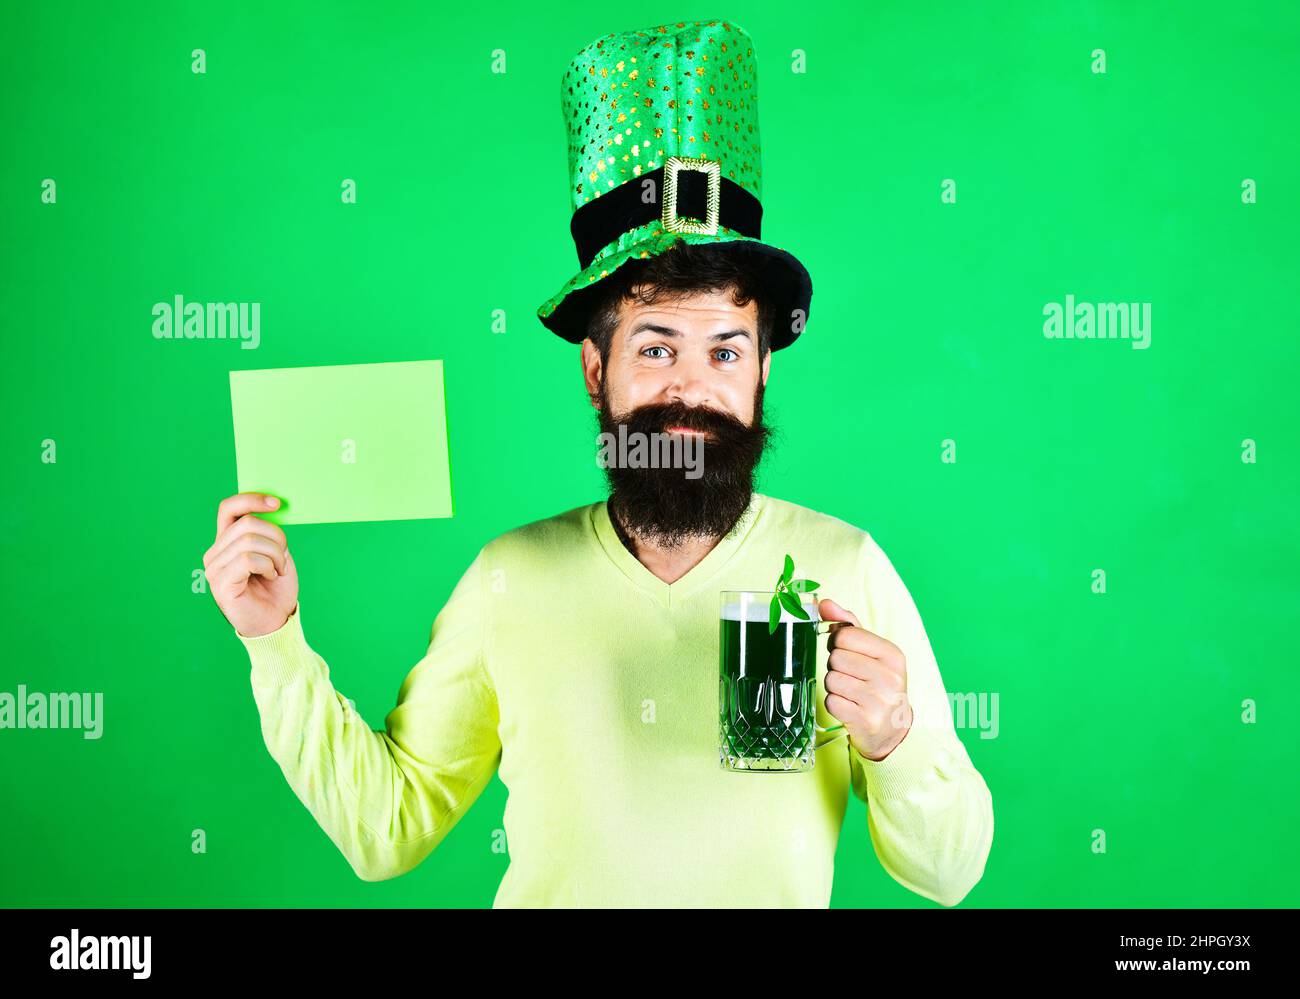 Bearded man in hat with billboard and mug of beer. Patricks Day celebration. Four leafed clover. Stock Photo